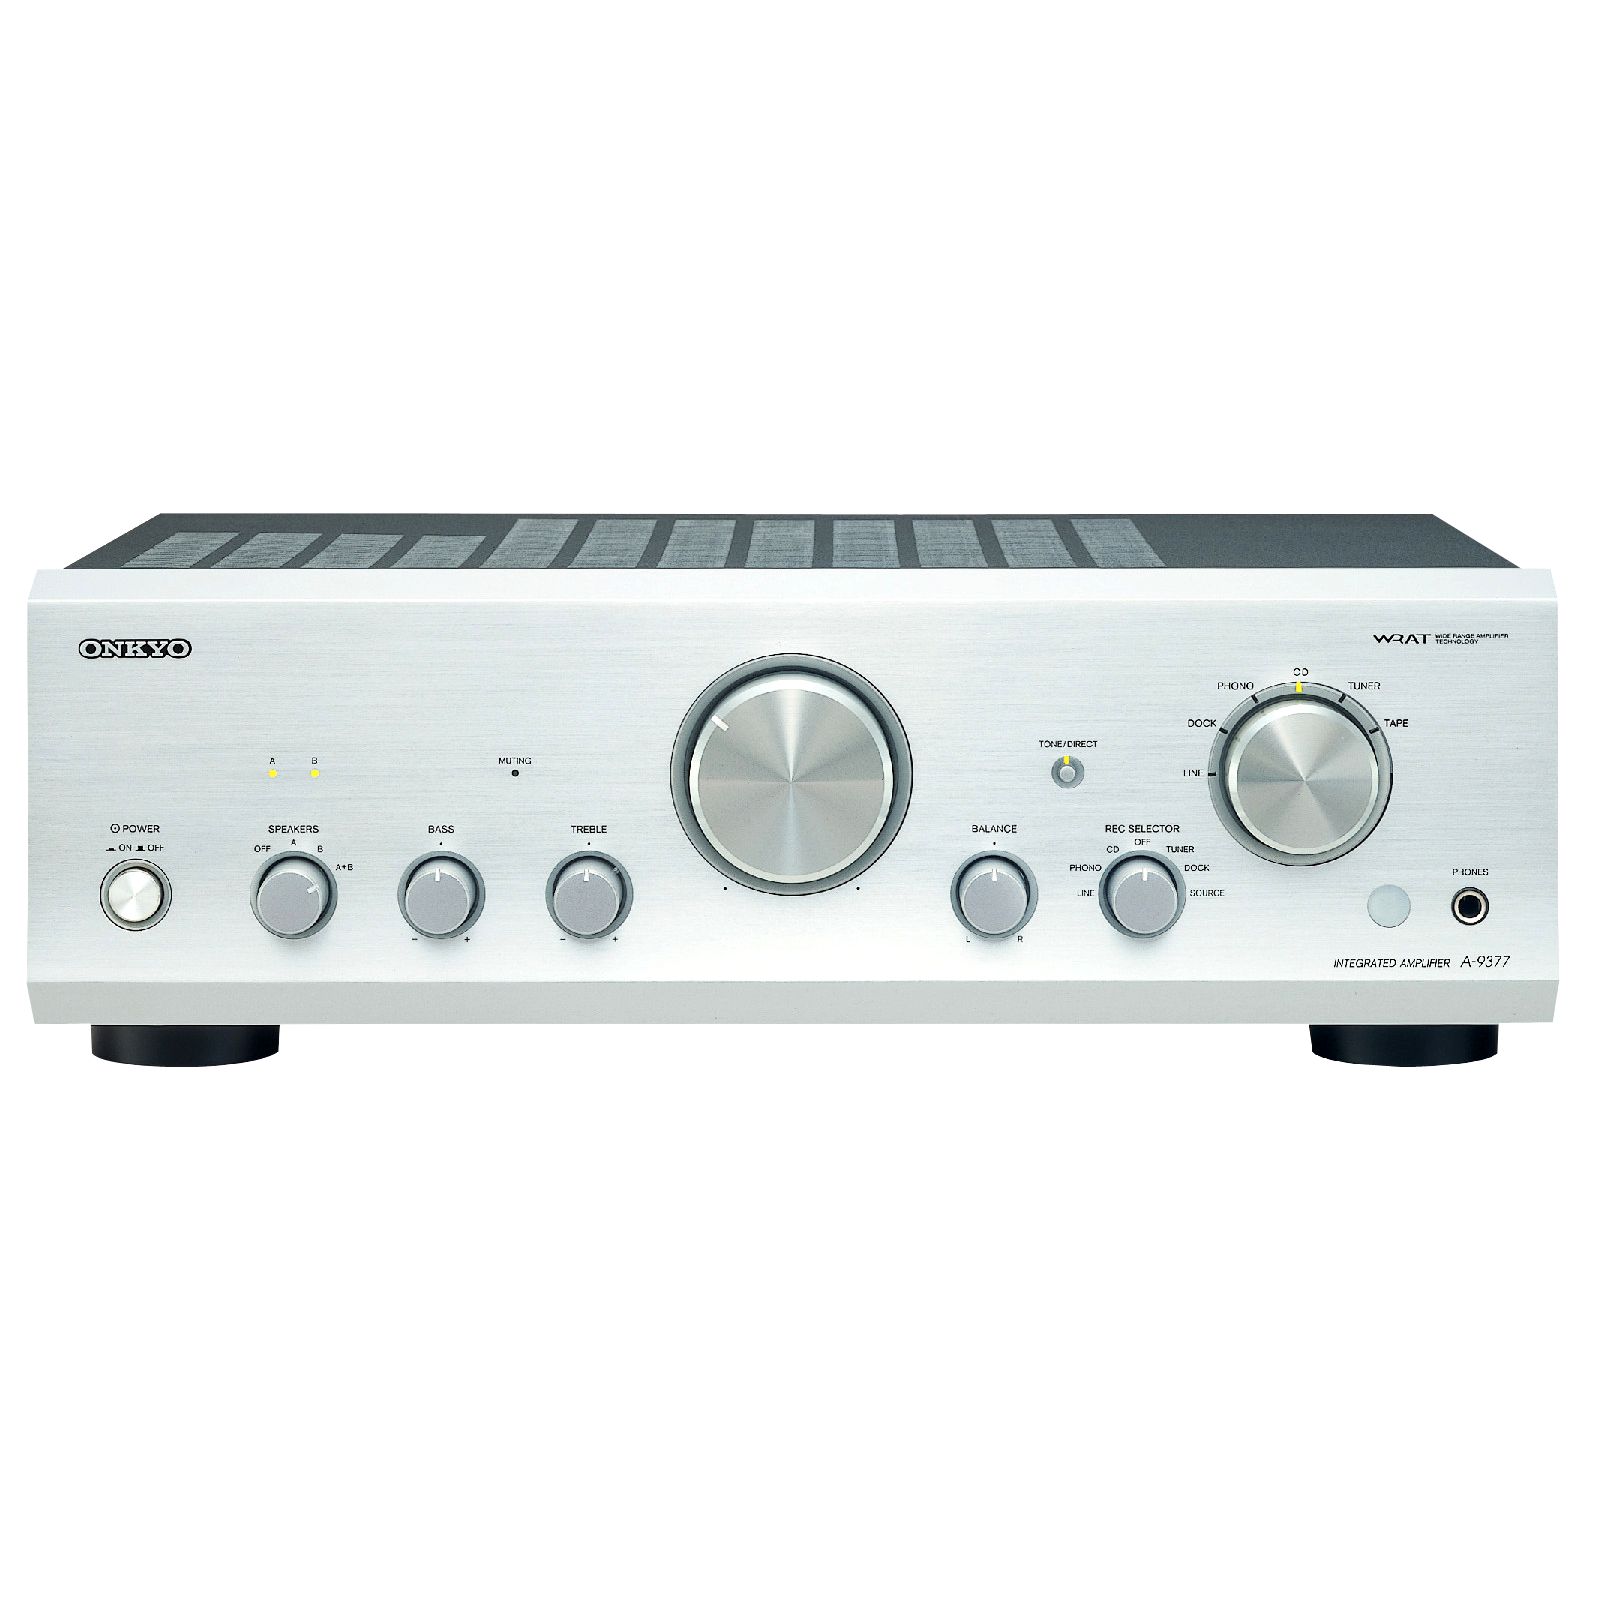 Onkyo A-9377S Integrated Stereo Amplifier, Silver at John Lewis